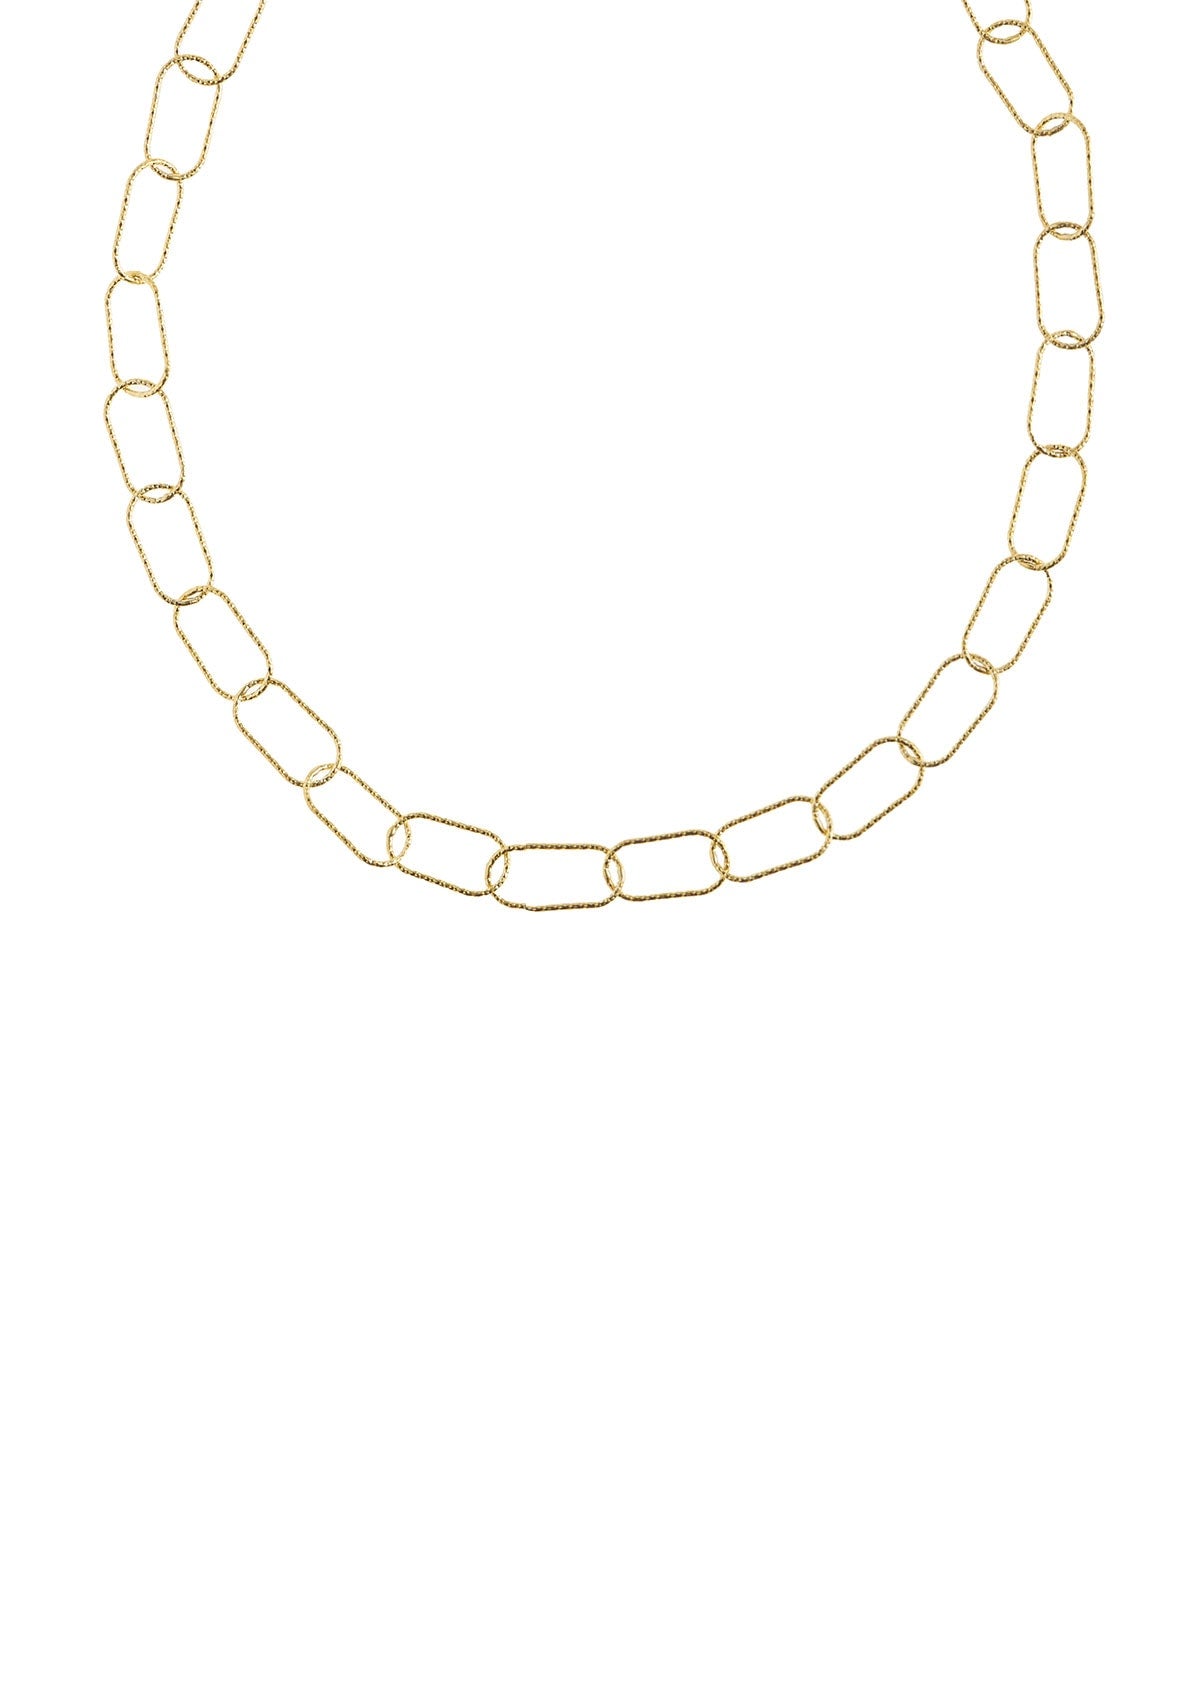 HERMINA ATHENS - OVAL STATEMENT CHAIN